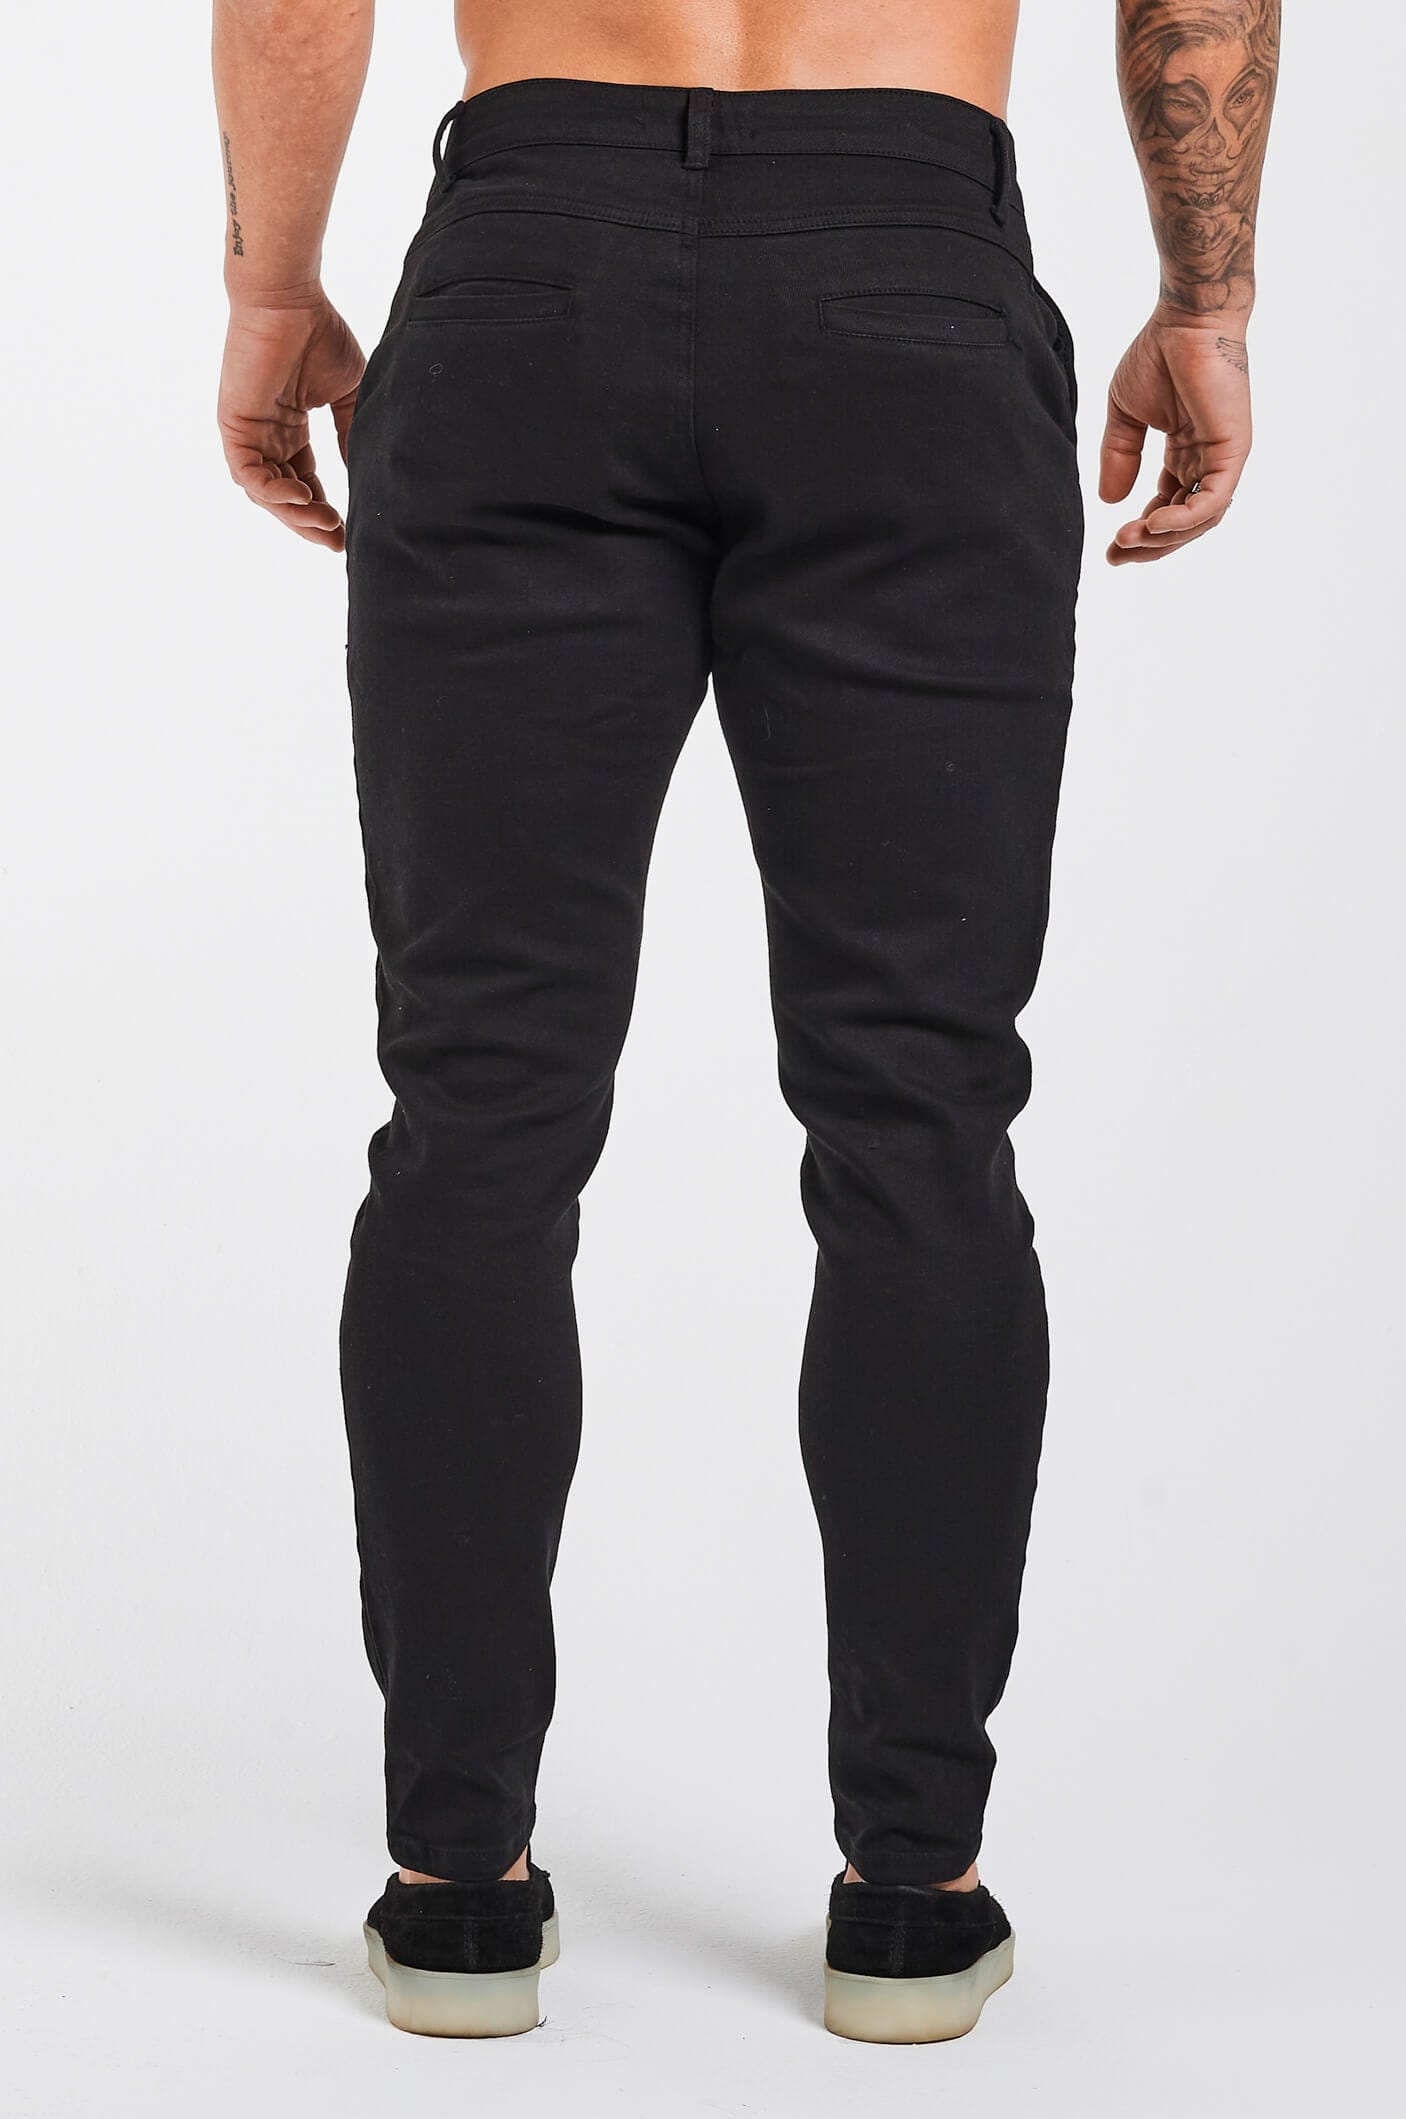 Legend London Trousers - chino TEXTURED STRETCH CHINO - BLACK